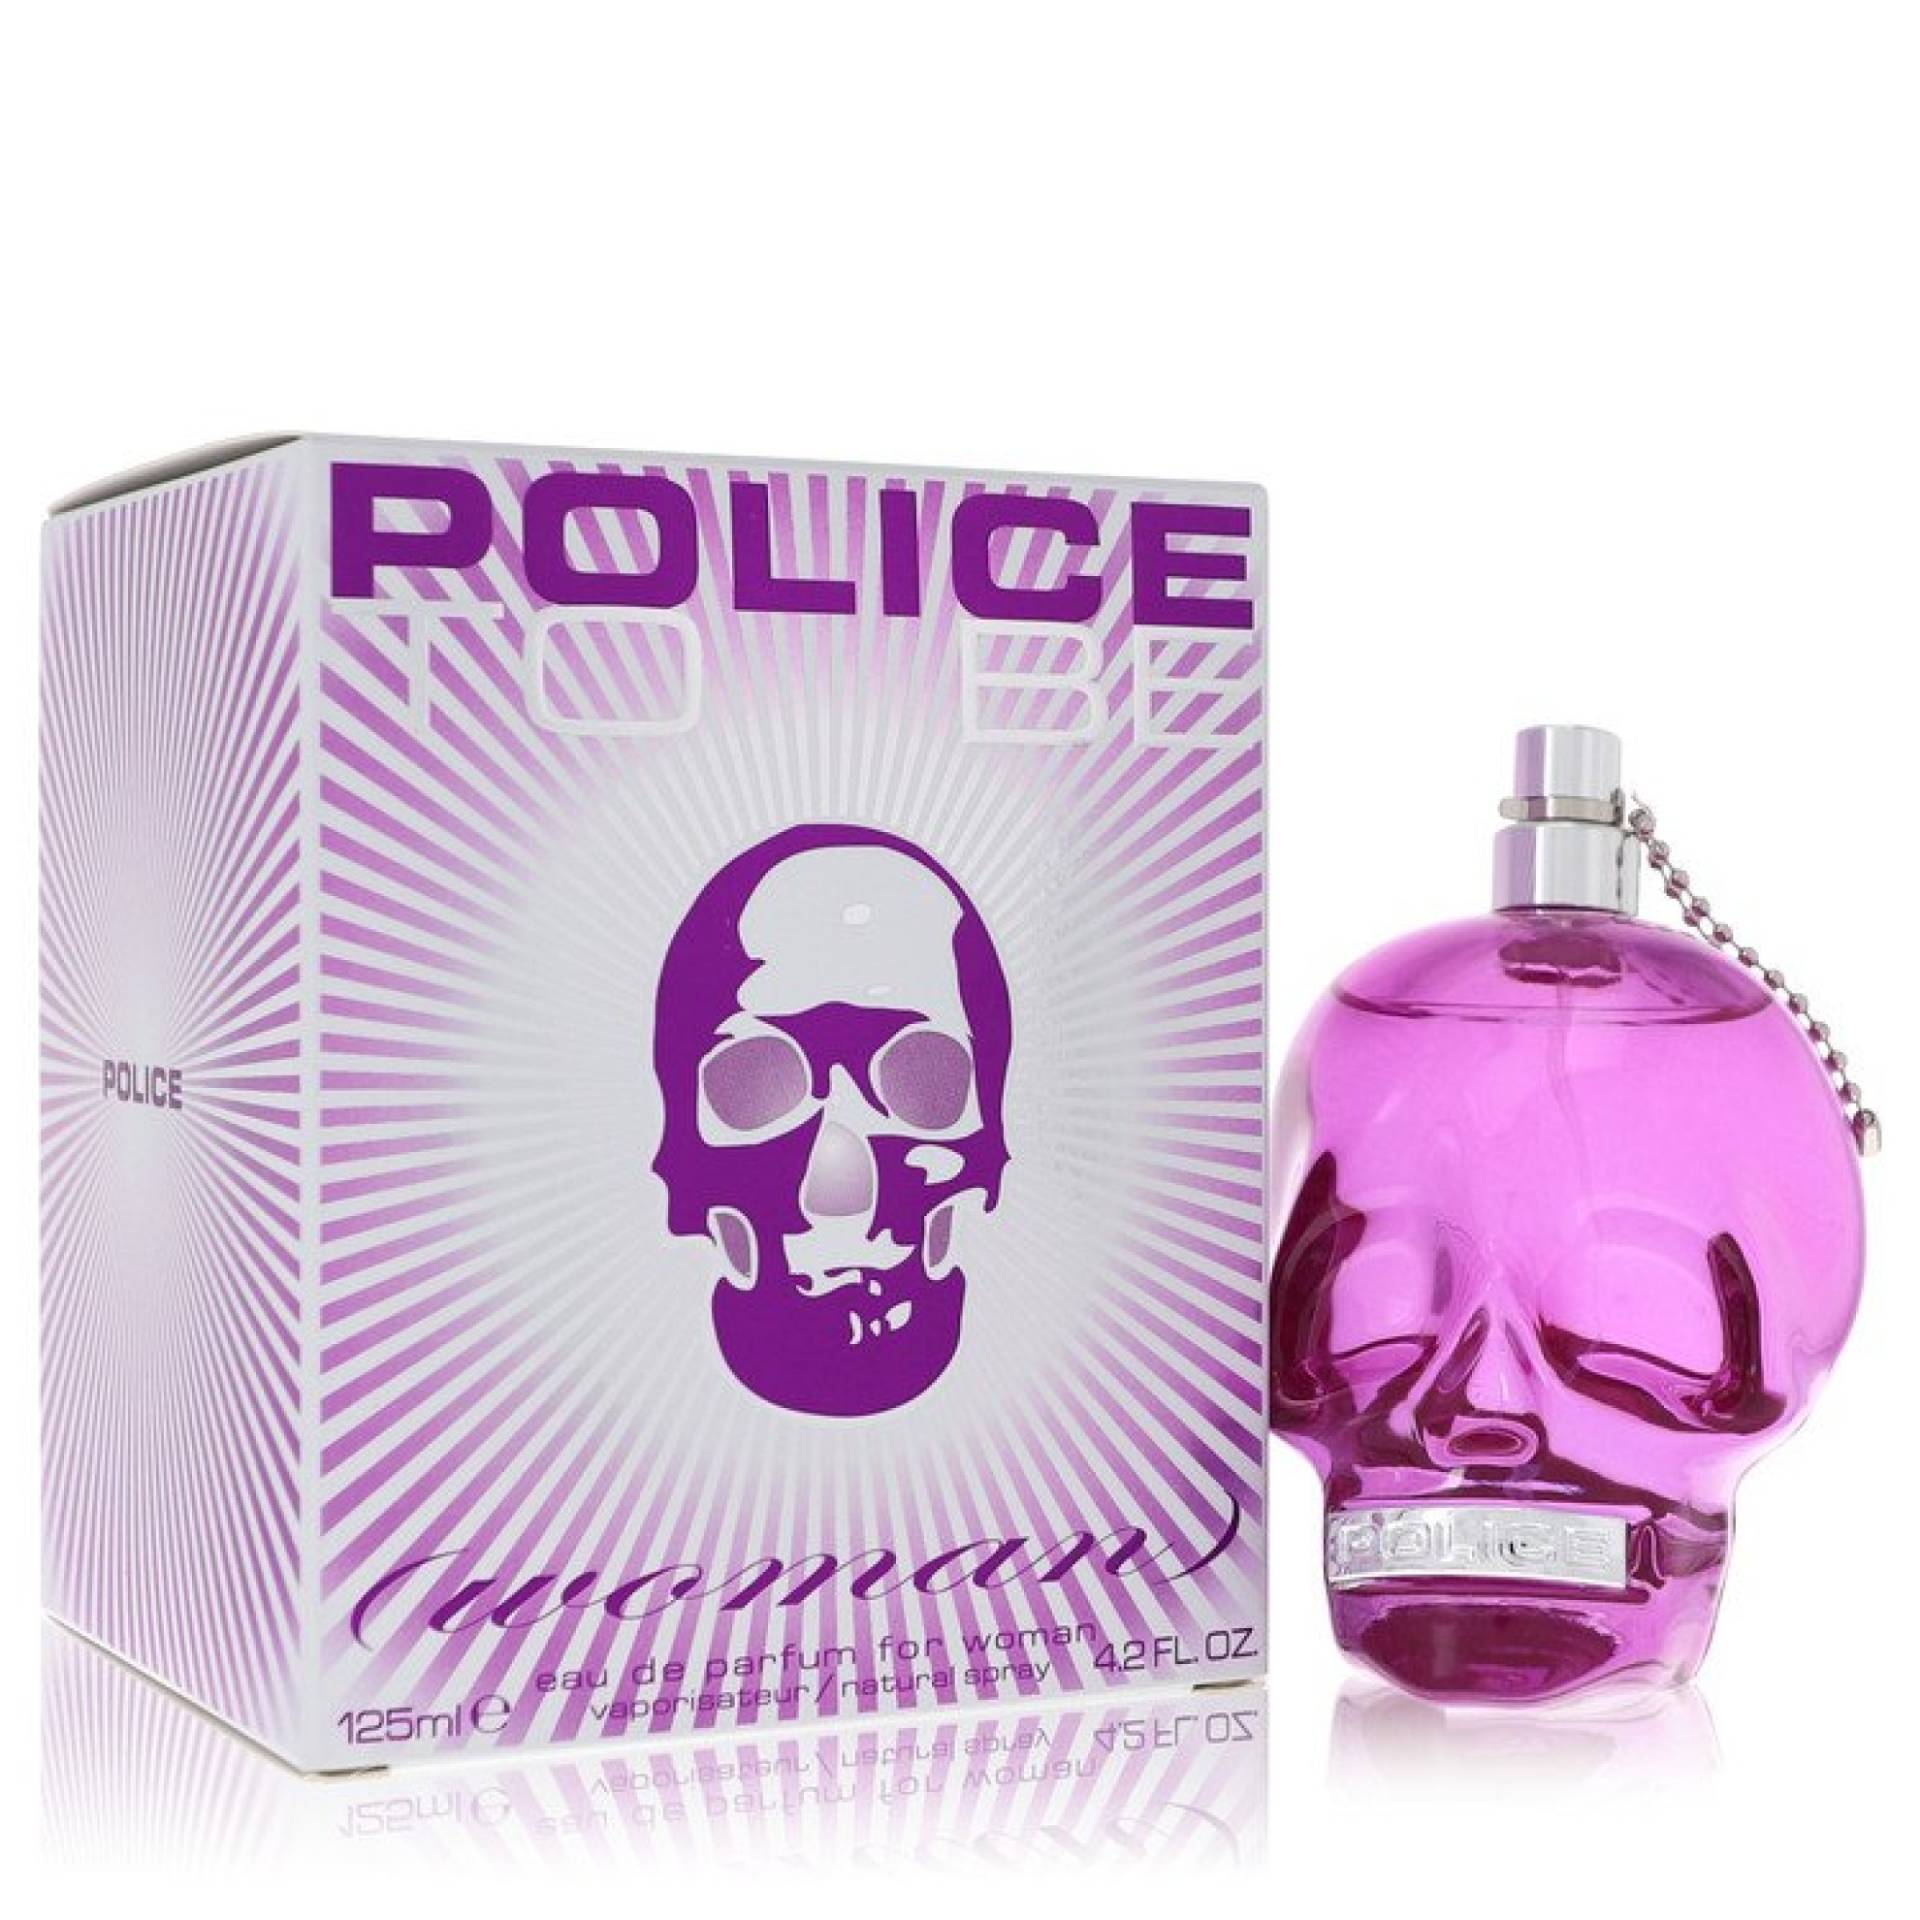 Police Colognes Police To Be or Not To Be Eau De Parfum Spray 125 ml von Police Colognes